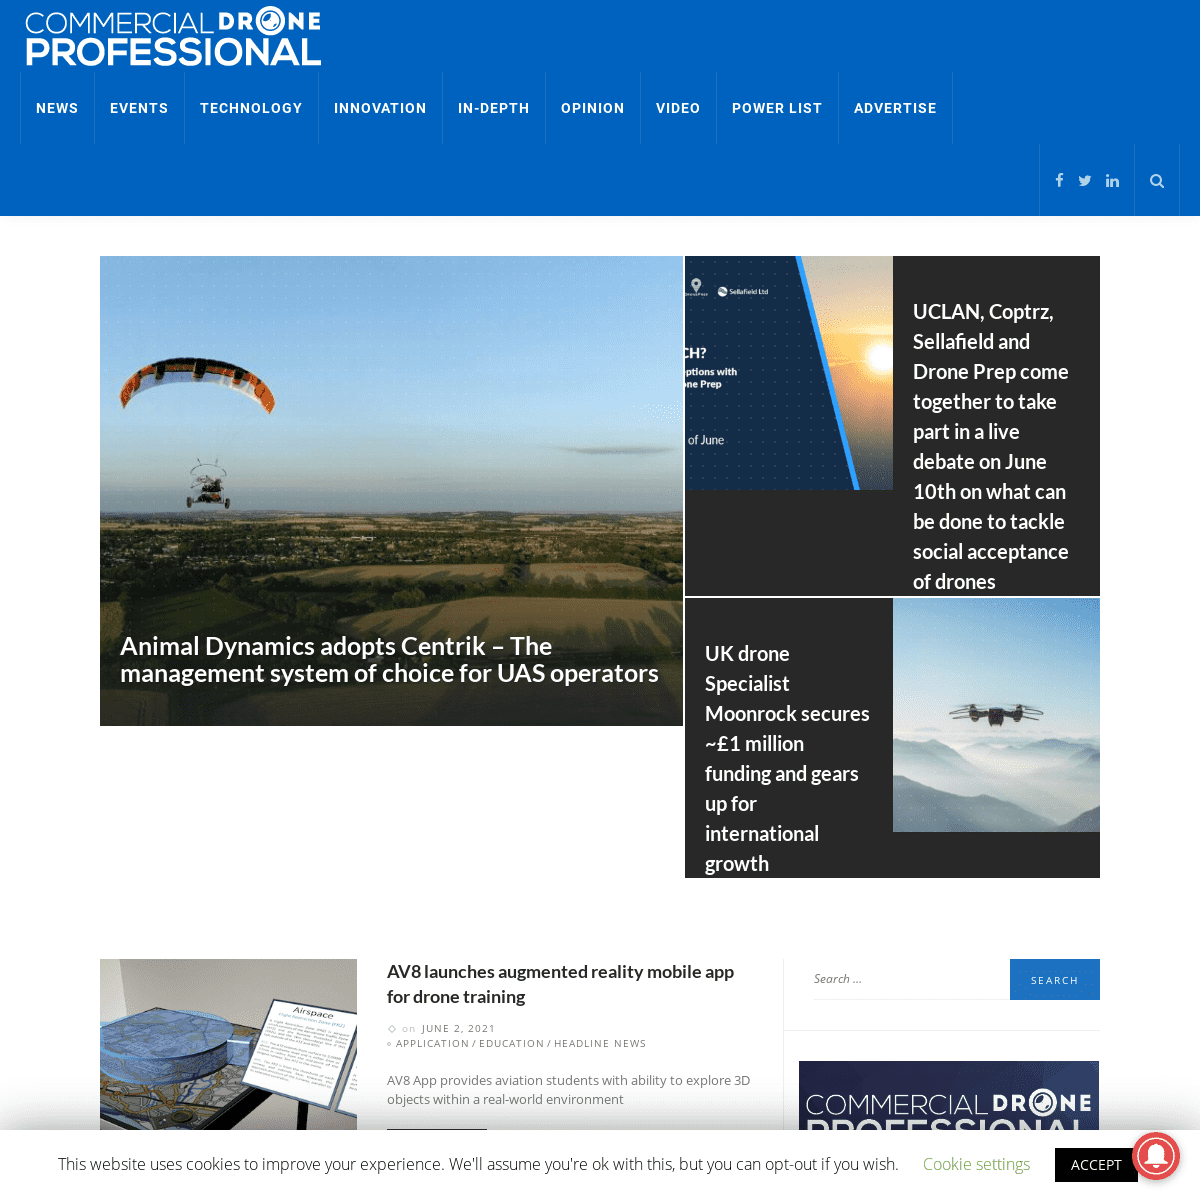 A complete backup of https://commercialdroneprofessional.com